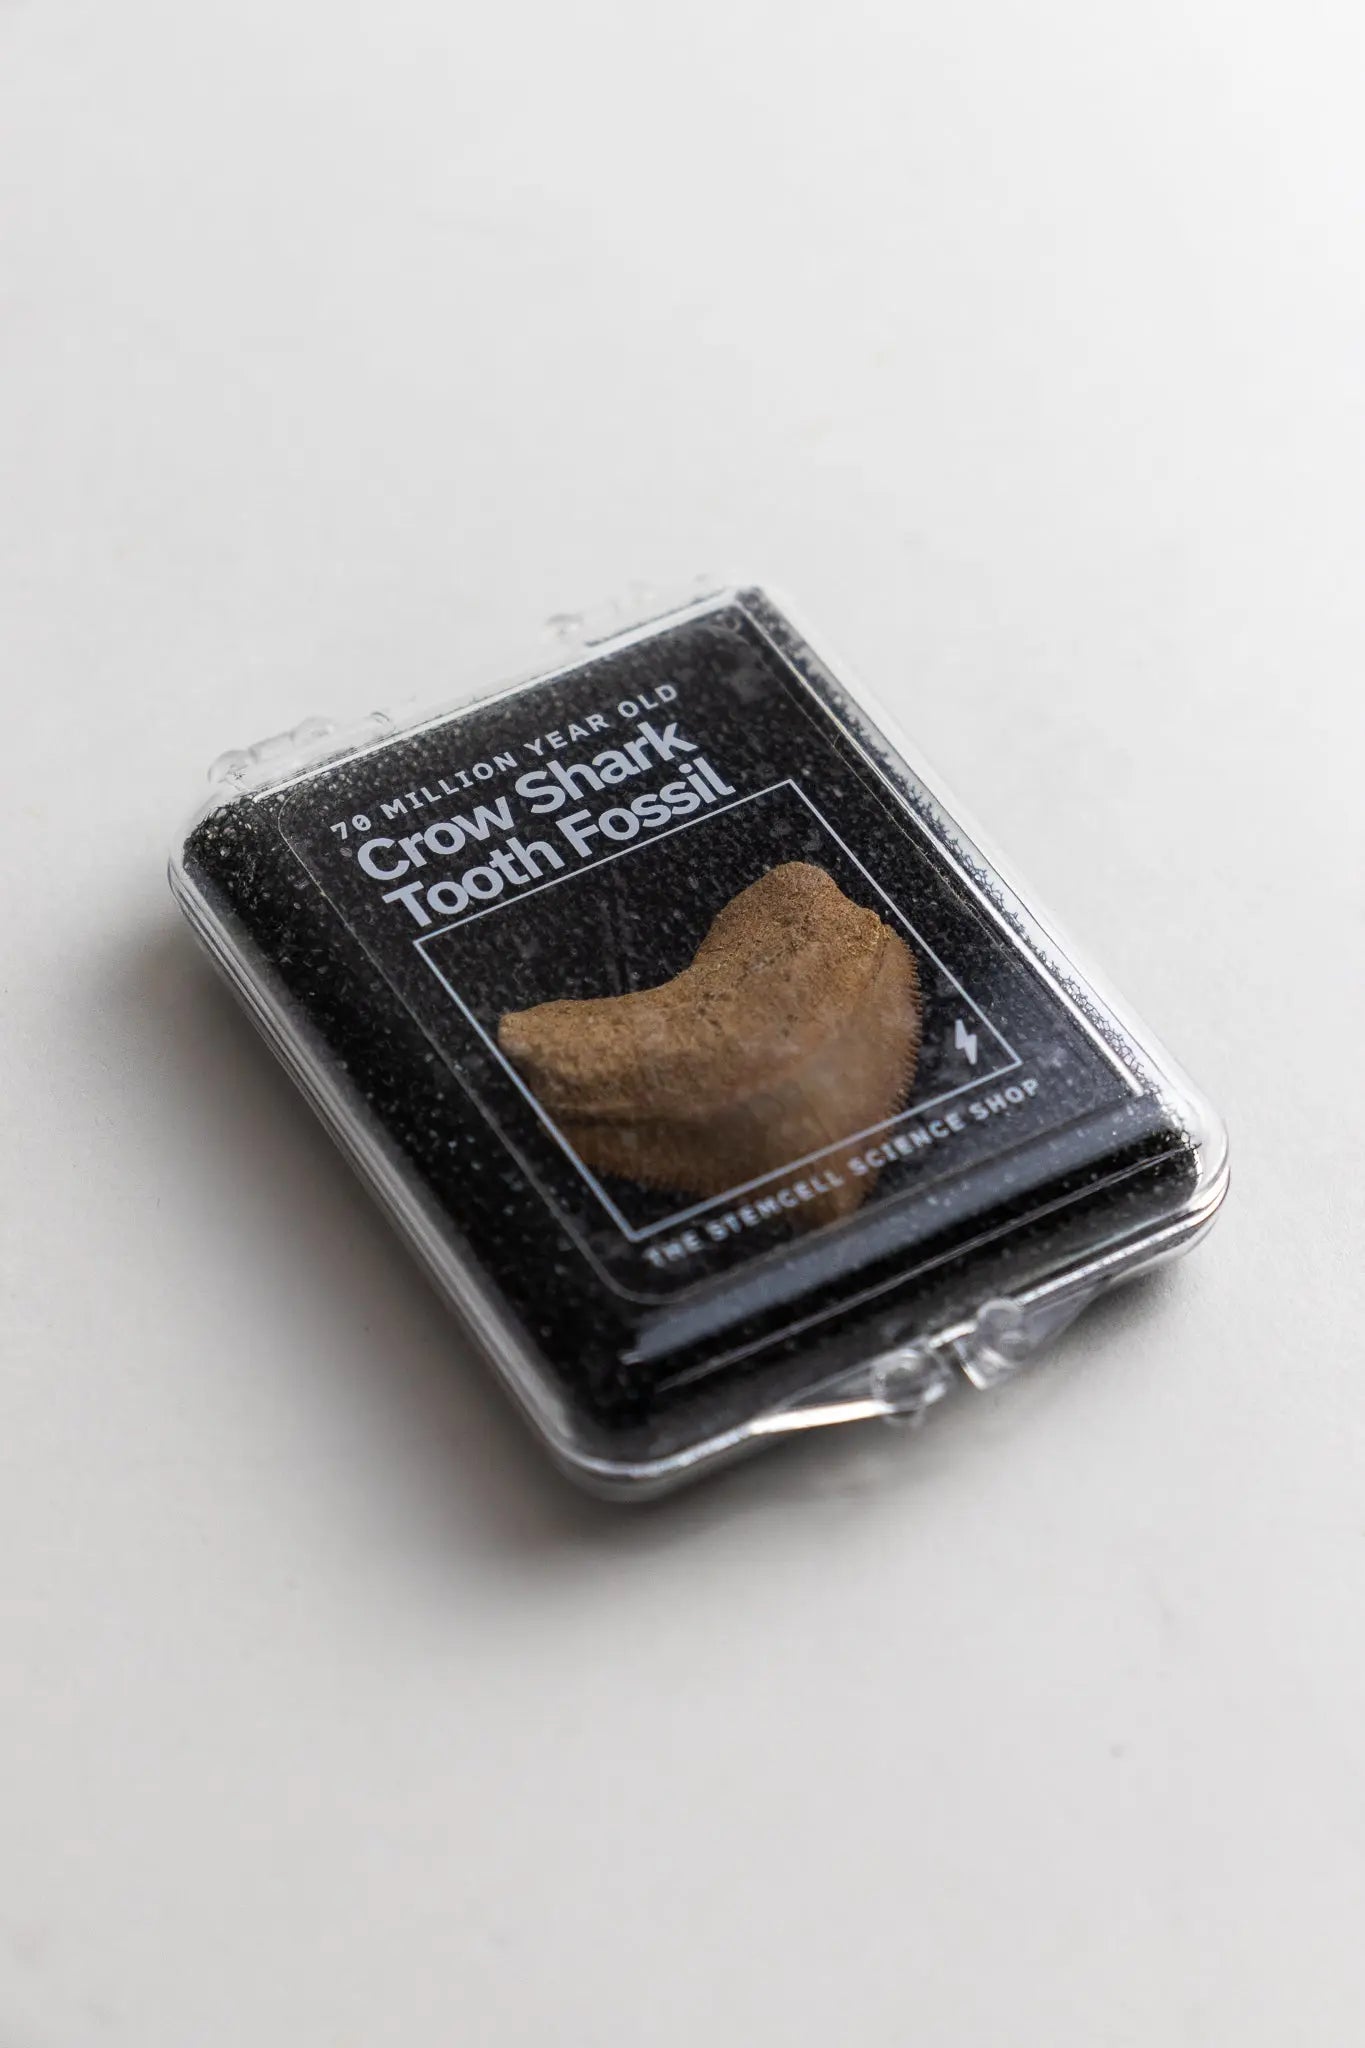 Crow Shark Tooth Fossil - Stemcell Science Shop